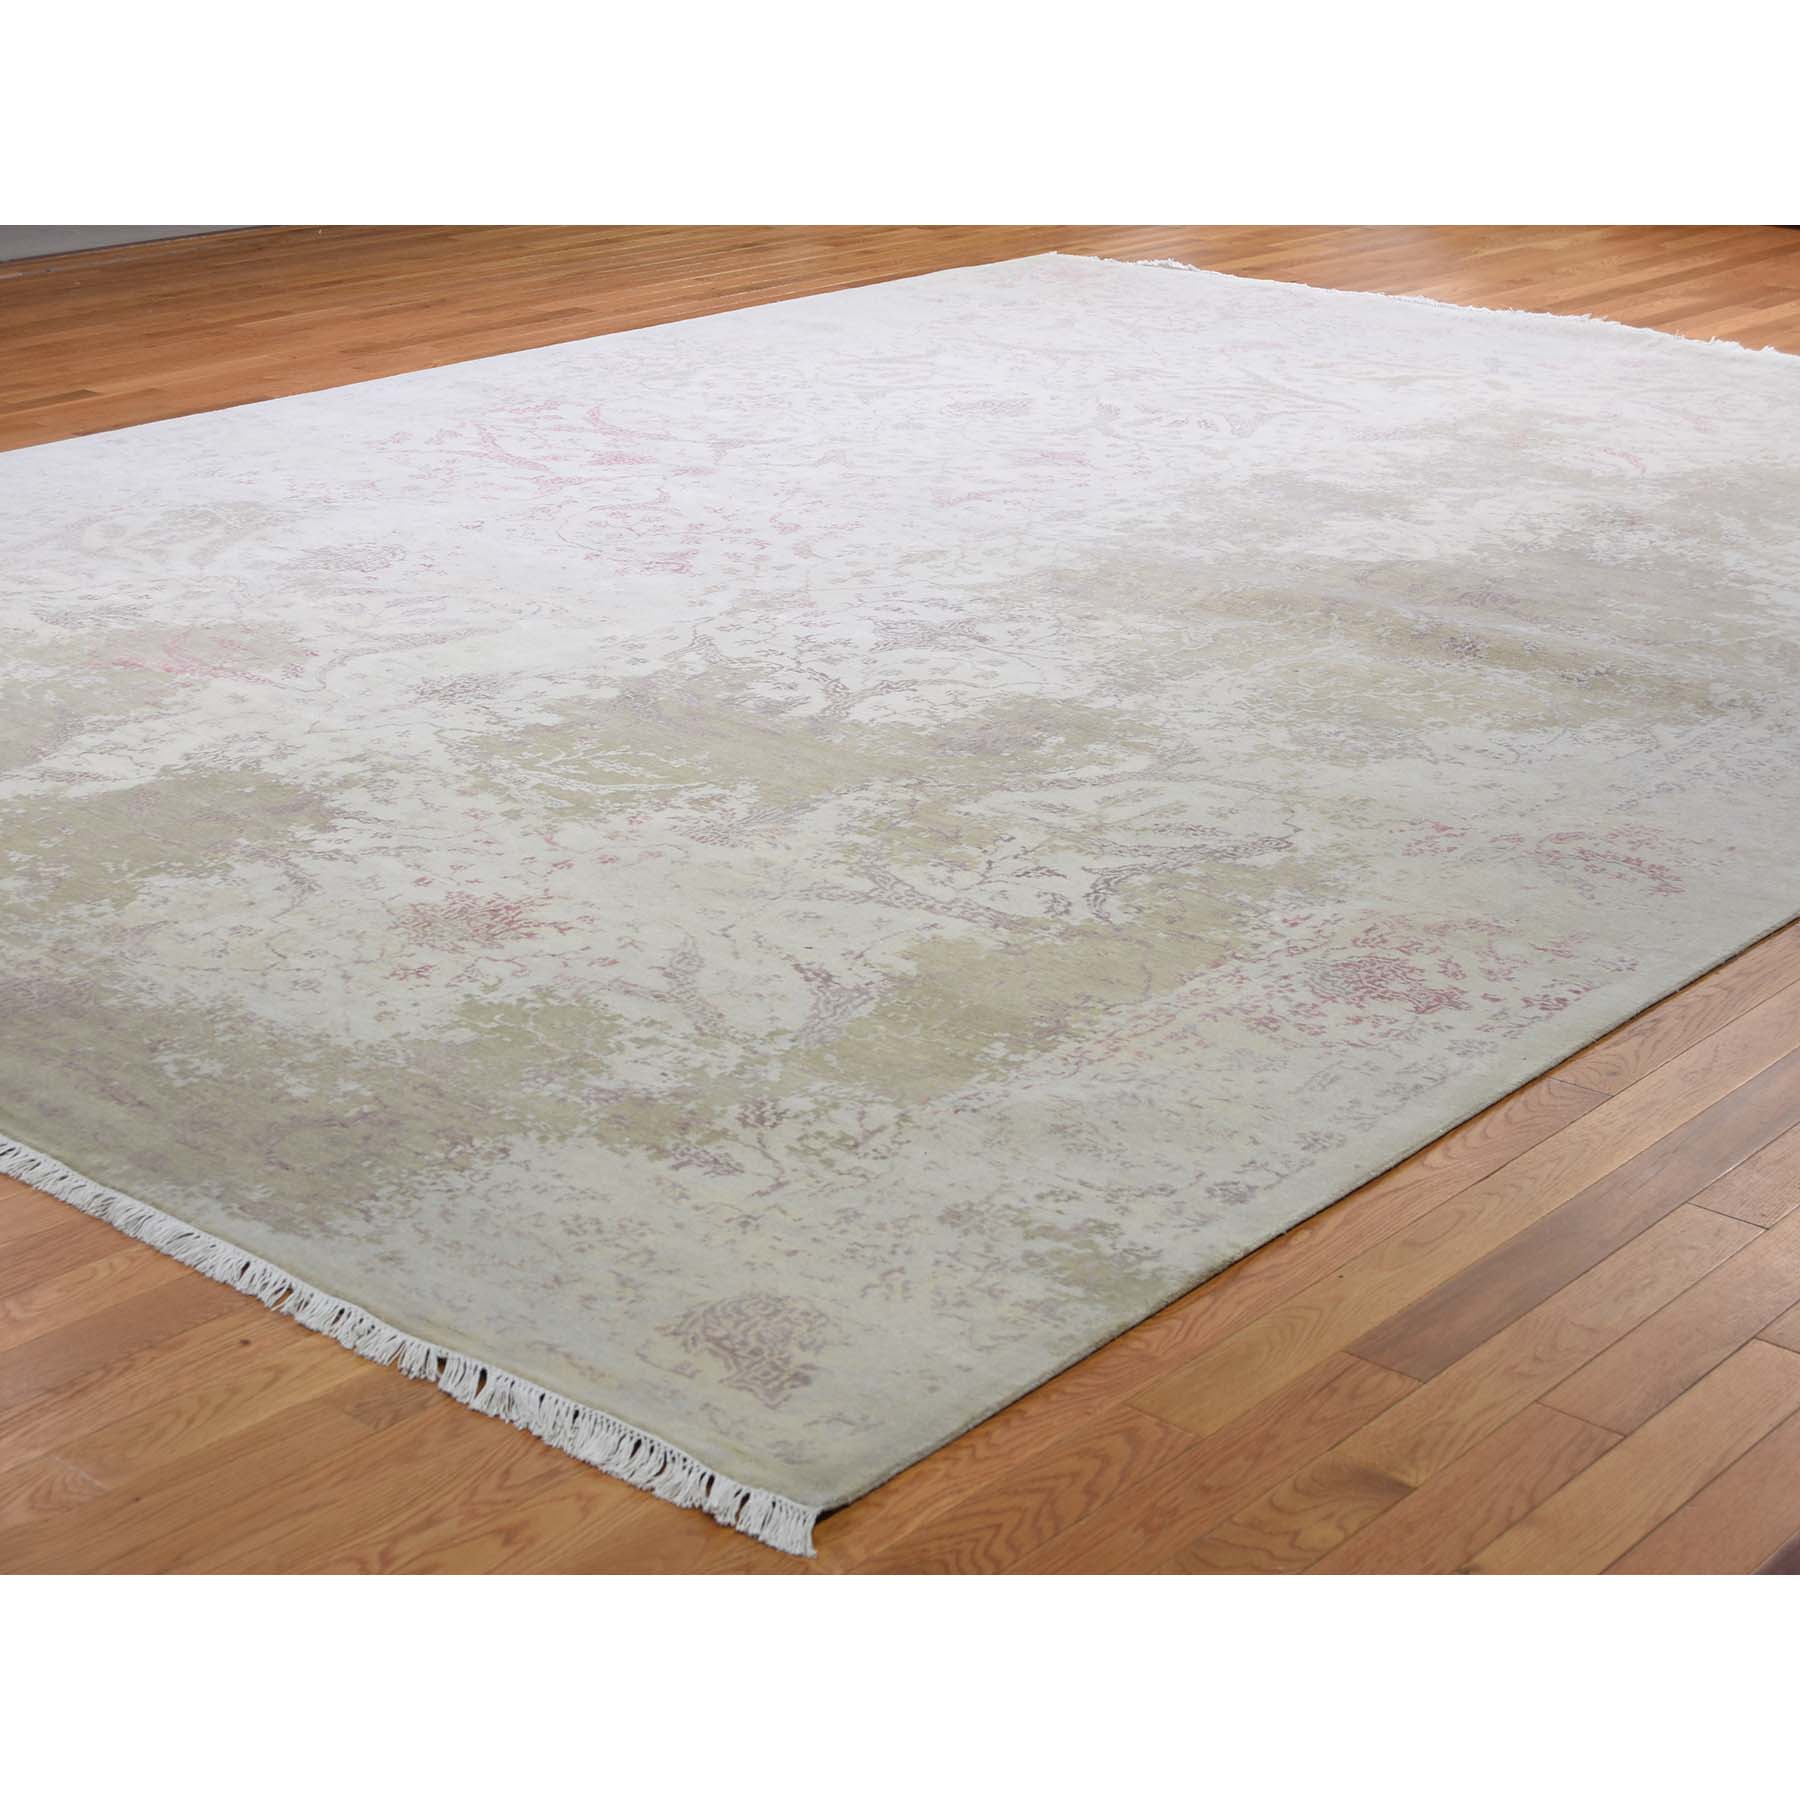 12'x15'6" Oversize Wool And Silk With Touch Of Pink Hand Woven Oriental Rug 